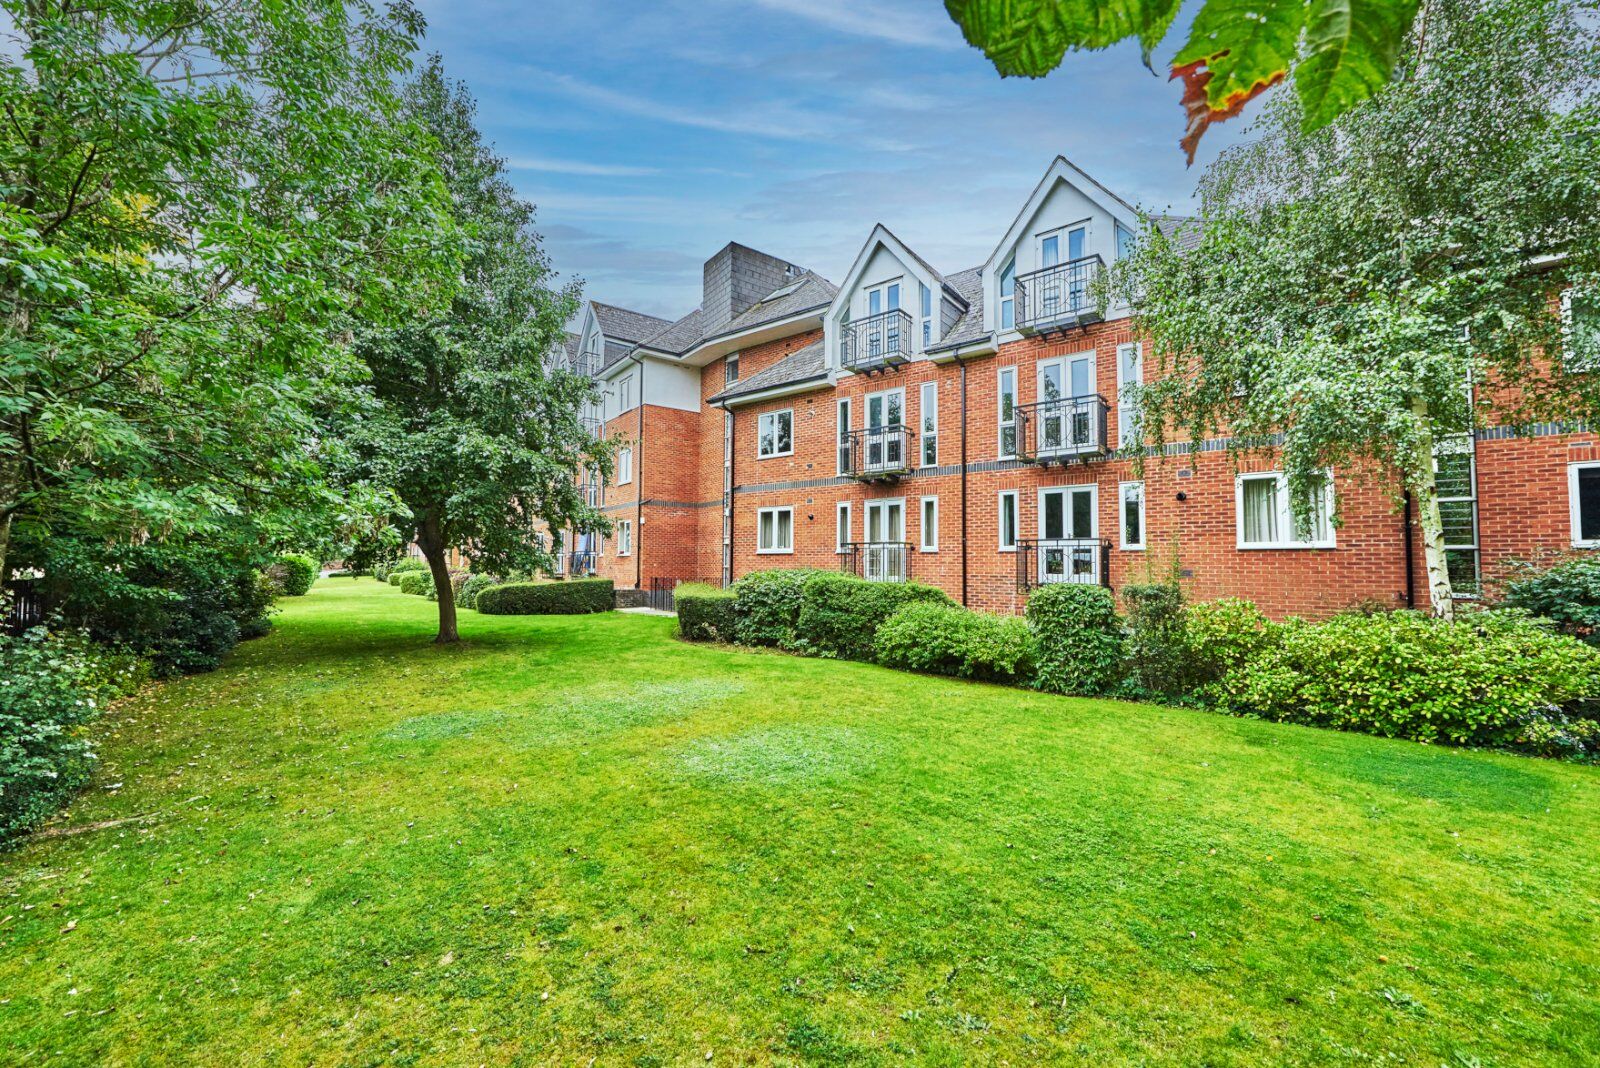 1 bedroom  flat for sale Greenwich Court, Park View Close, AL1, main image